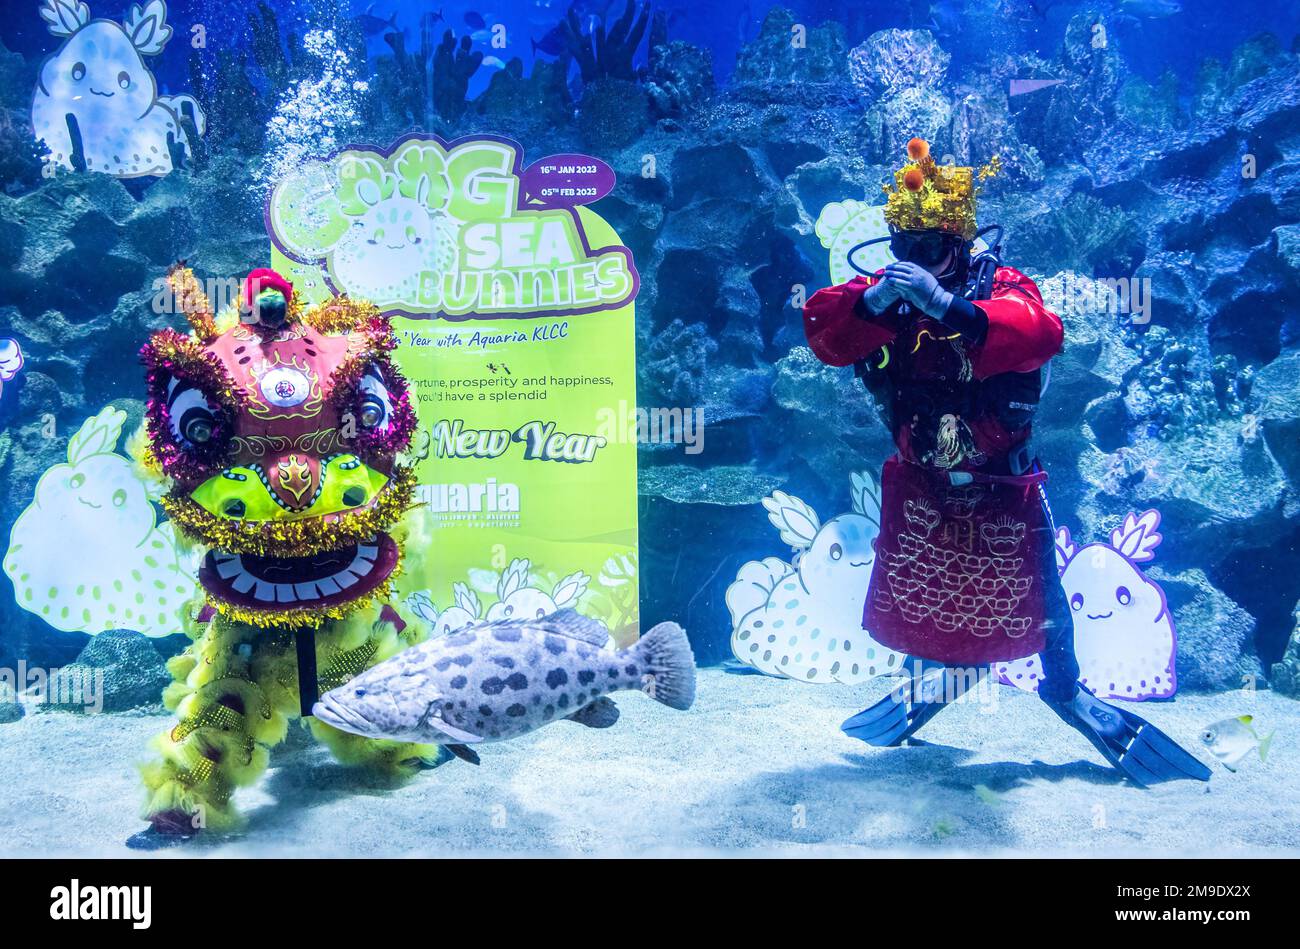 Kuala Lumpur, Malaysia. 18th Jan, 2023. Divers dressed in a God of Fortune costume and a lion dancer perform at the Aquaria KLCC ahead of the Lunar New Year celebrations. Lunar New Year which falls on January 22, 2023, welcomes the year of the Rabbit, which will be celebrated by the Chinese around the world. Lunar New Year which falls on January 22, 2023, welcomes the year of the Rabbit, which the Chinese around the world will celebrate. Credit: SOPA Images Limited/Alamy Live News Stock Photo